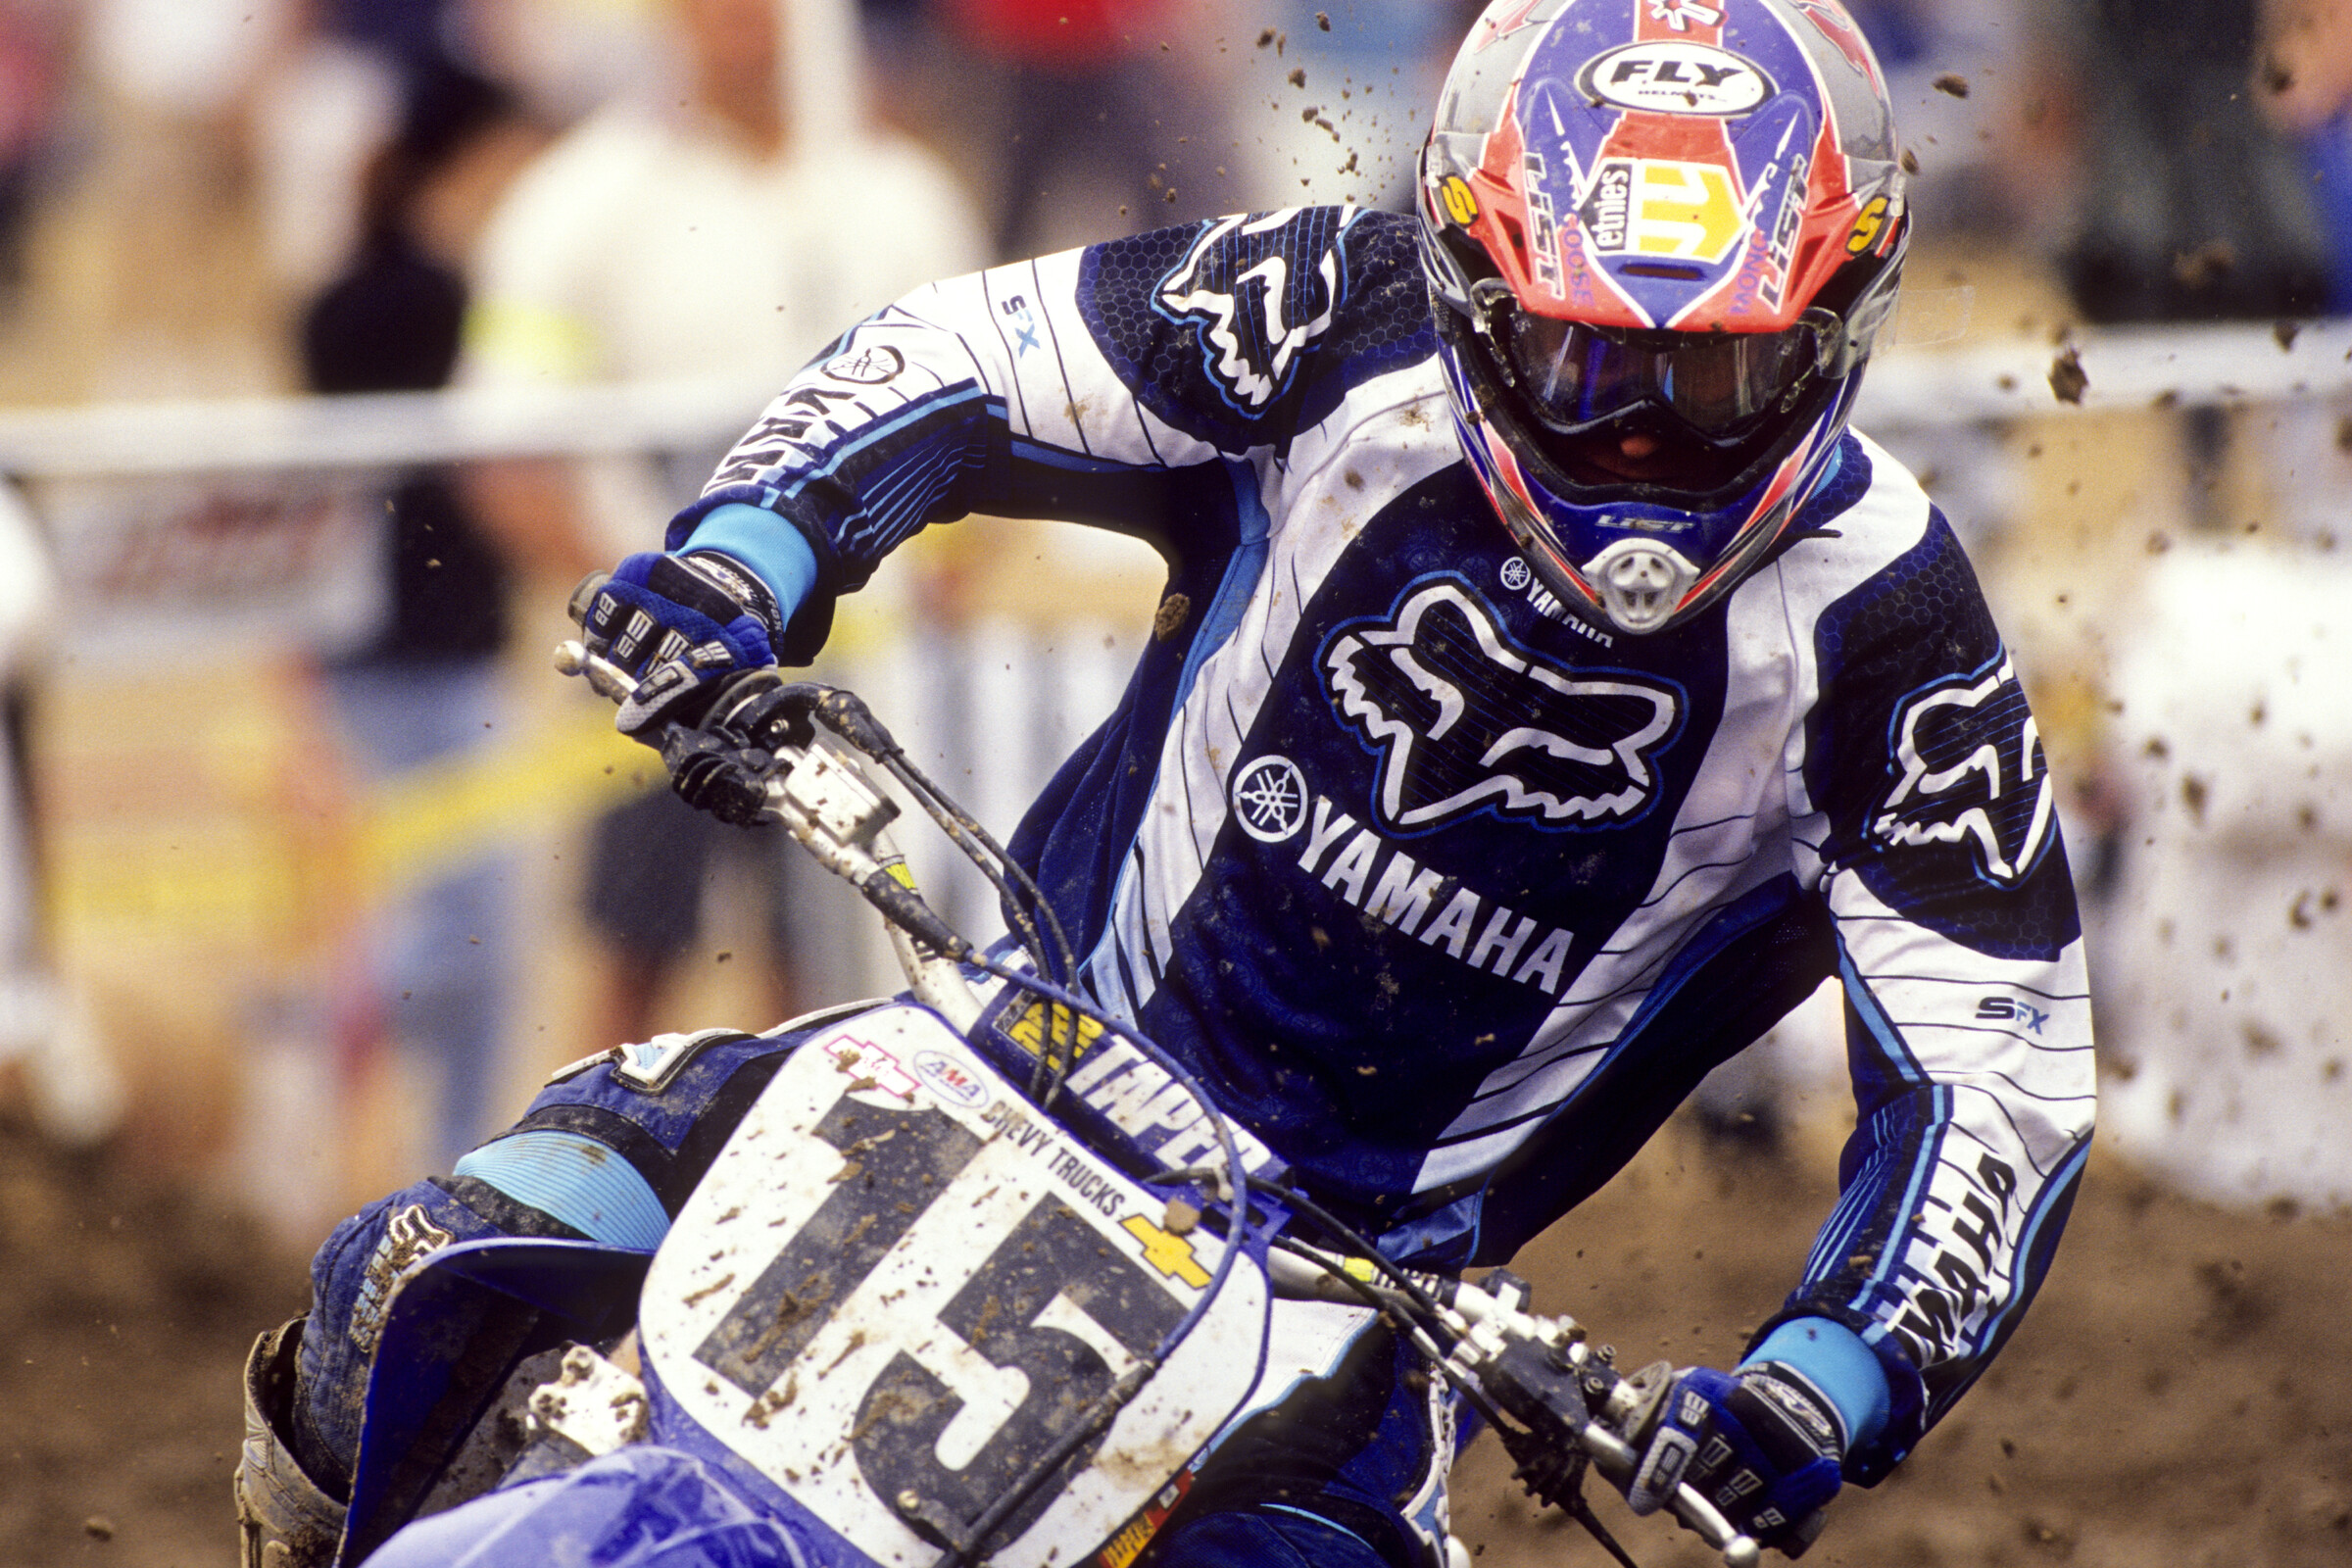 Steve Matthes 15 Reasons to Celebrate Tim Ferry on His Birthday pic